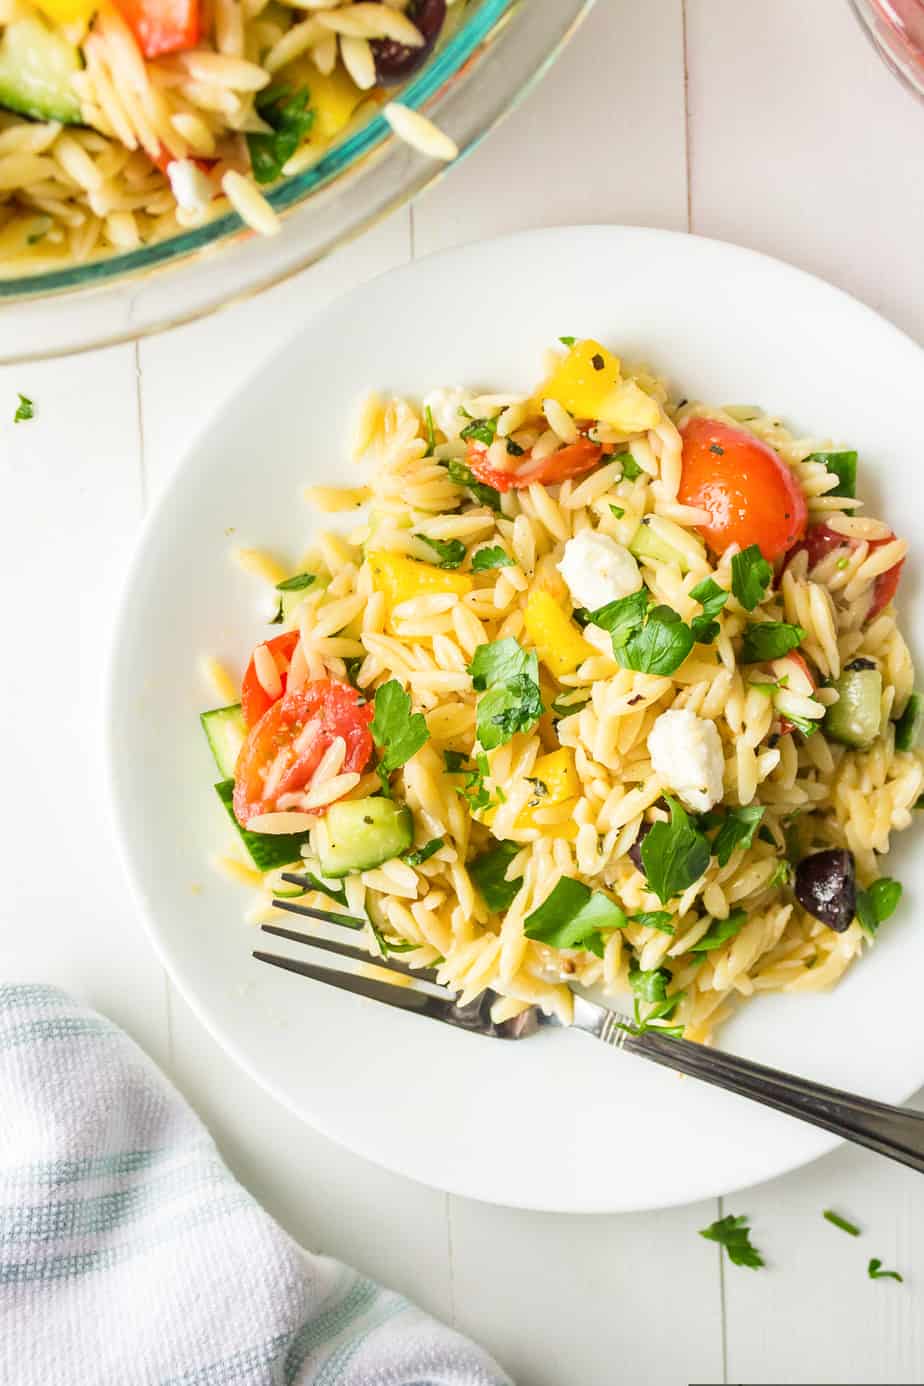 Greek orzo salad on a plate from overhead with a fork next to a bowl of more cold salad topped with feta cheese, parsley, and mixed with colorful diced vegetables